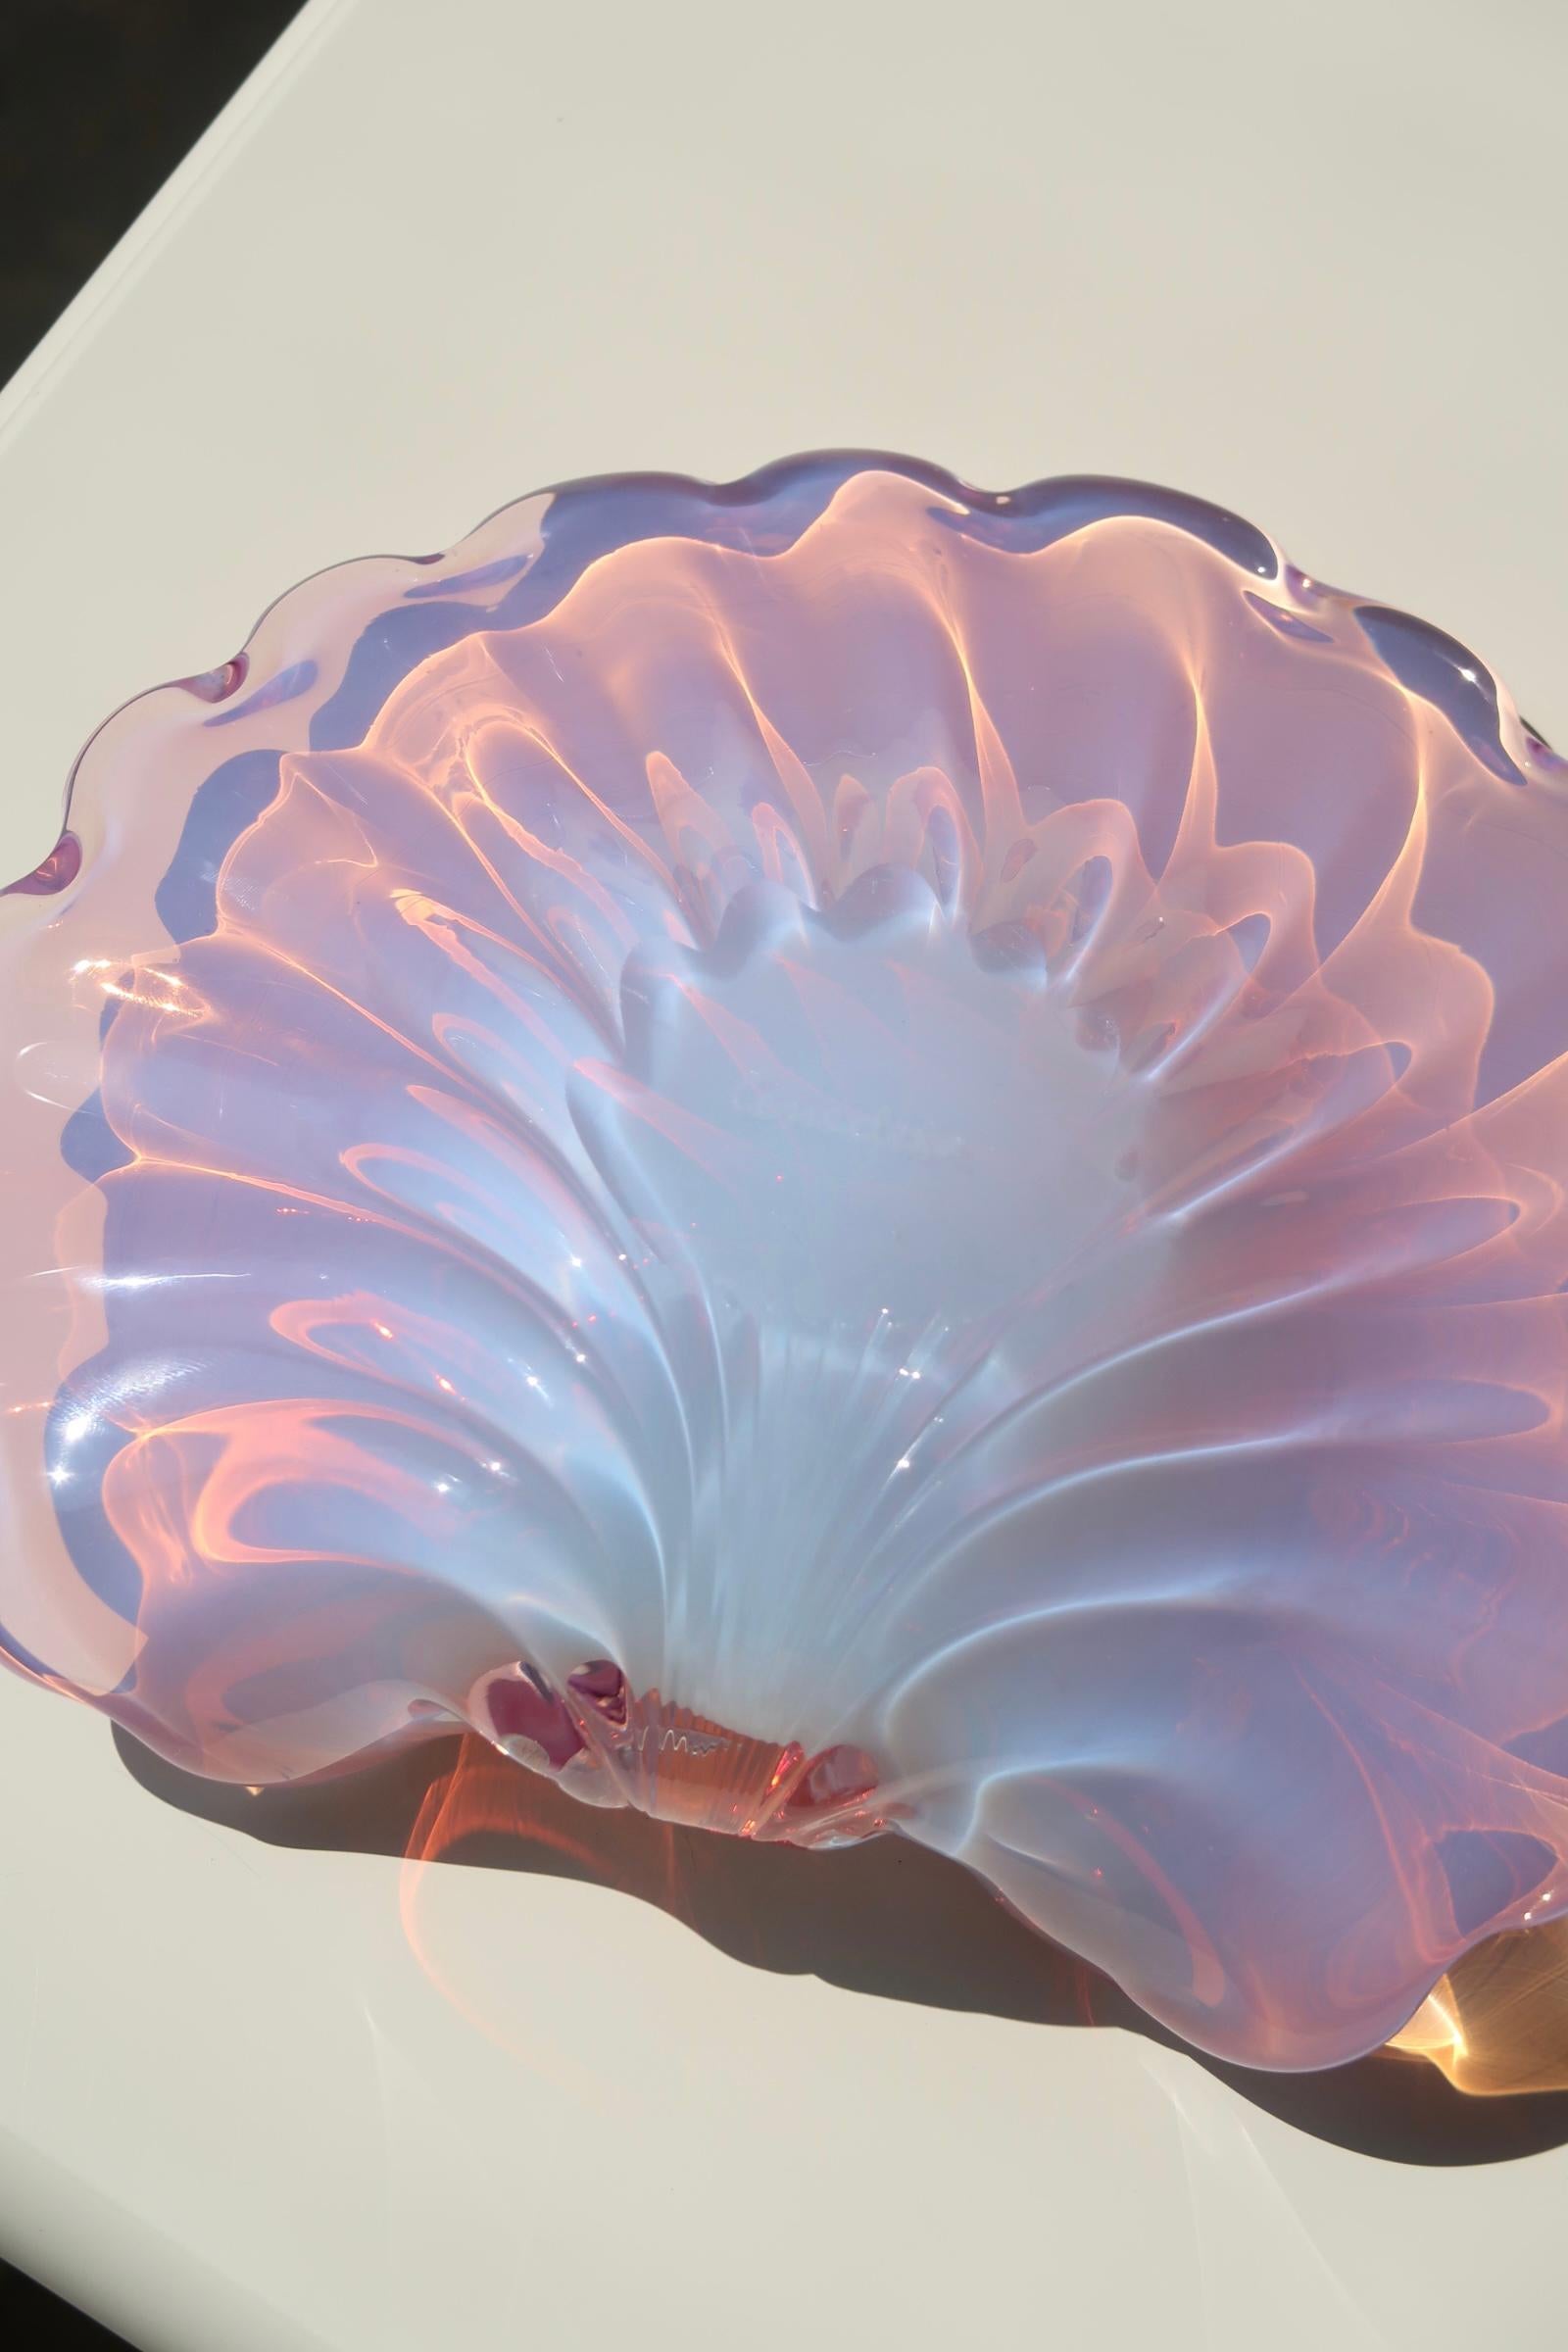 Vintage Cenedese Murano bowl shaped like a clam. Mouth-blown in purple / pink opaline glass. Handmade in Italy, 1970s. Signed below the bottom. L: 19 cm W: 17 cm H: 6.5 cm.